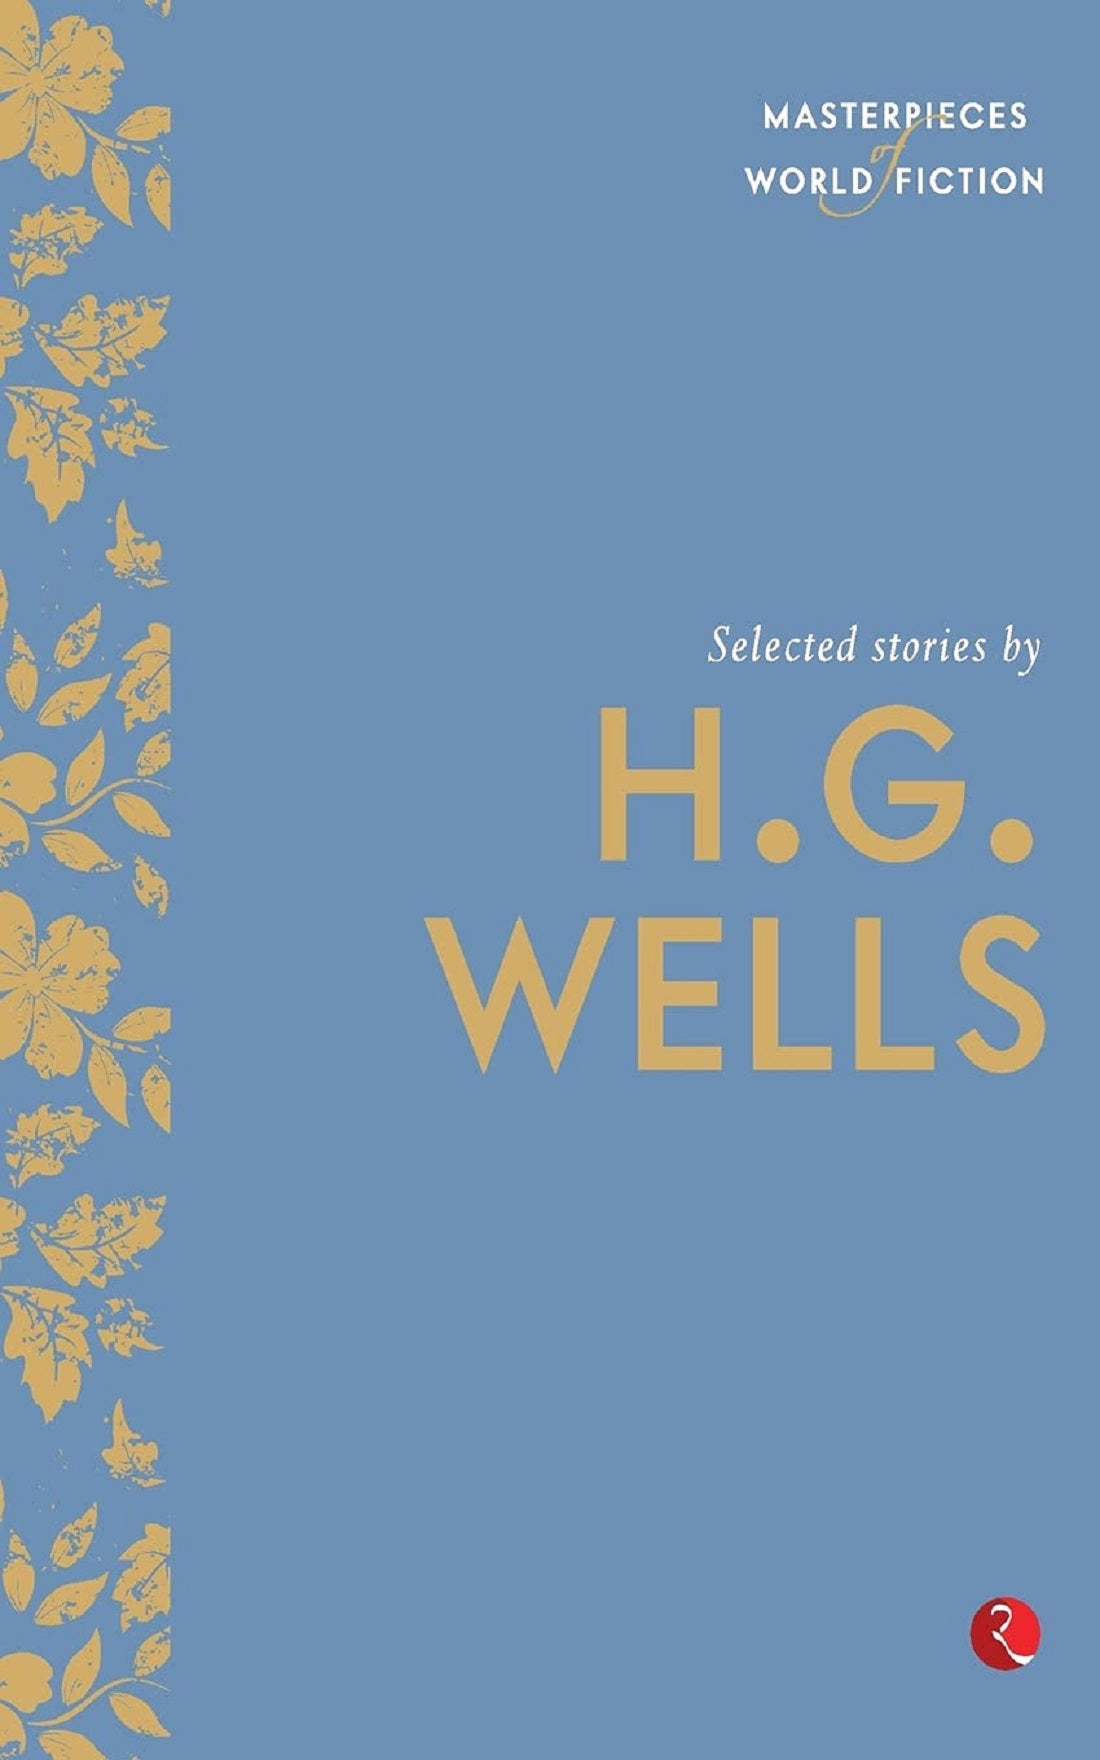 SELECTED STORIES BY H G WELLS